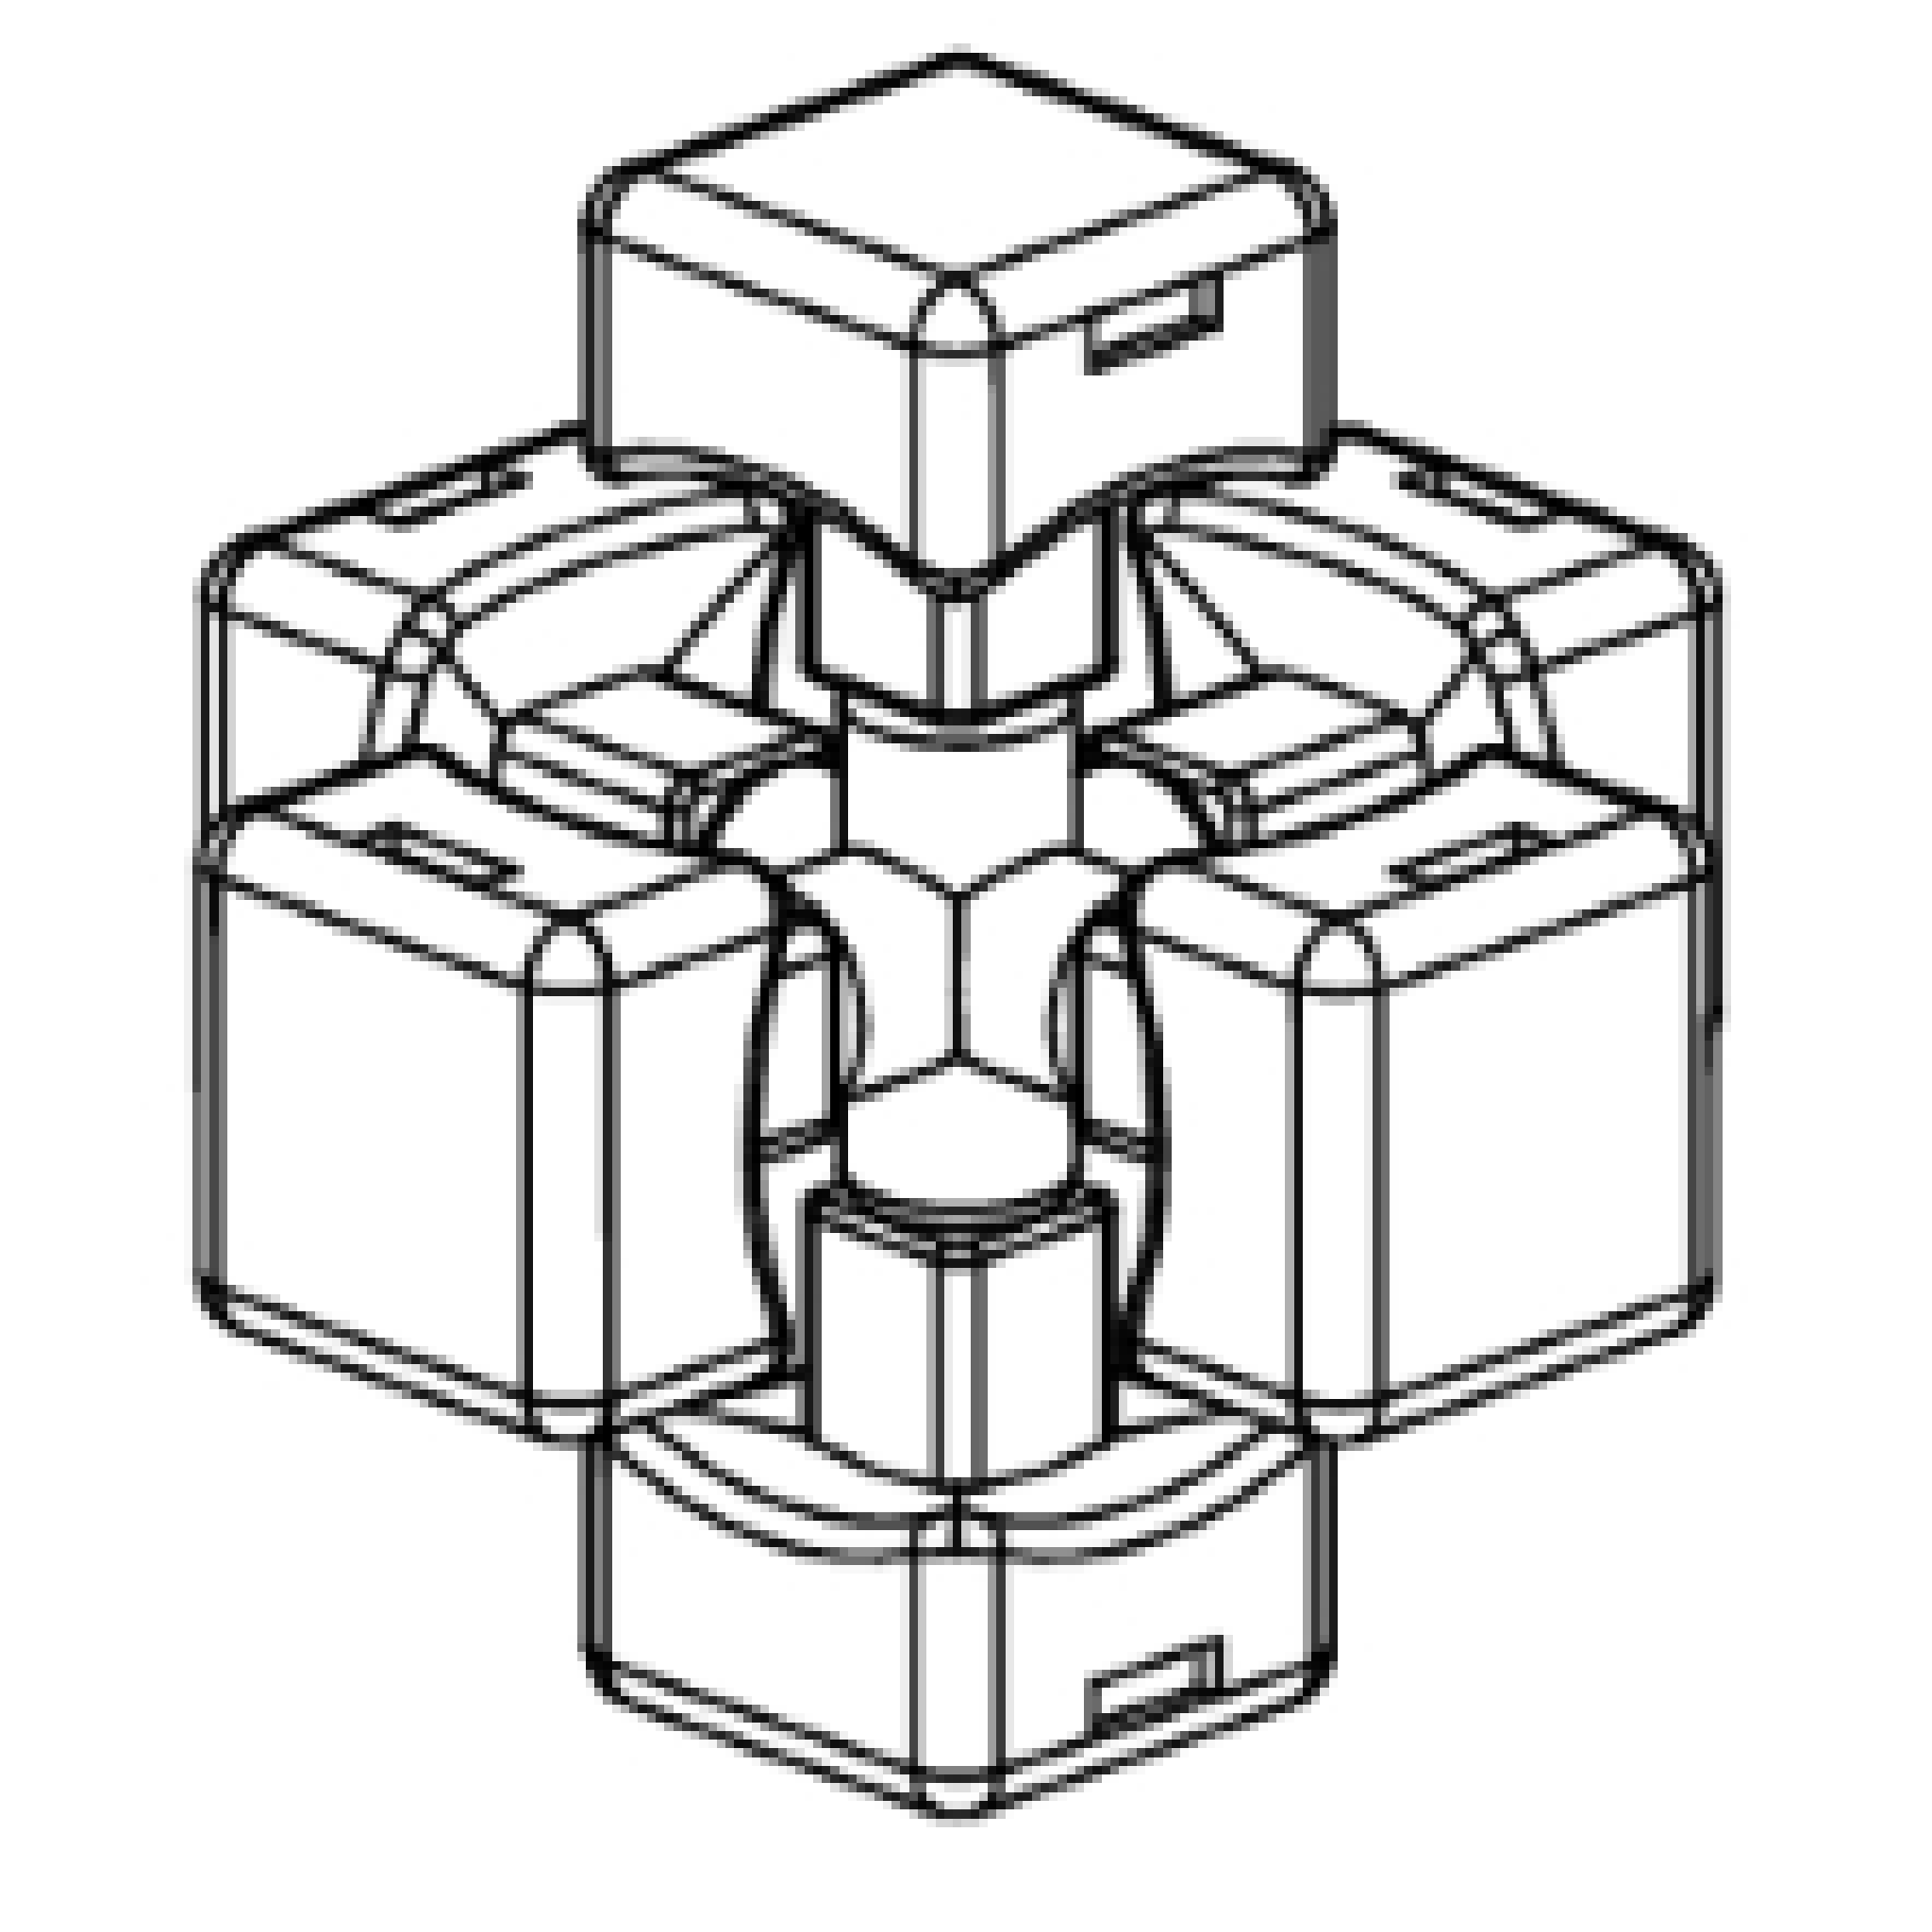 Fig 01:  The centre piece has a fixed relationship with the other pieces.